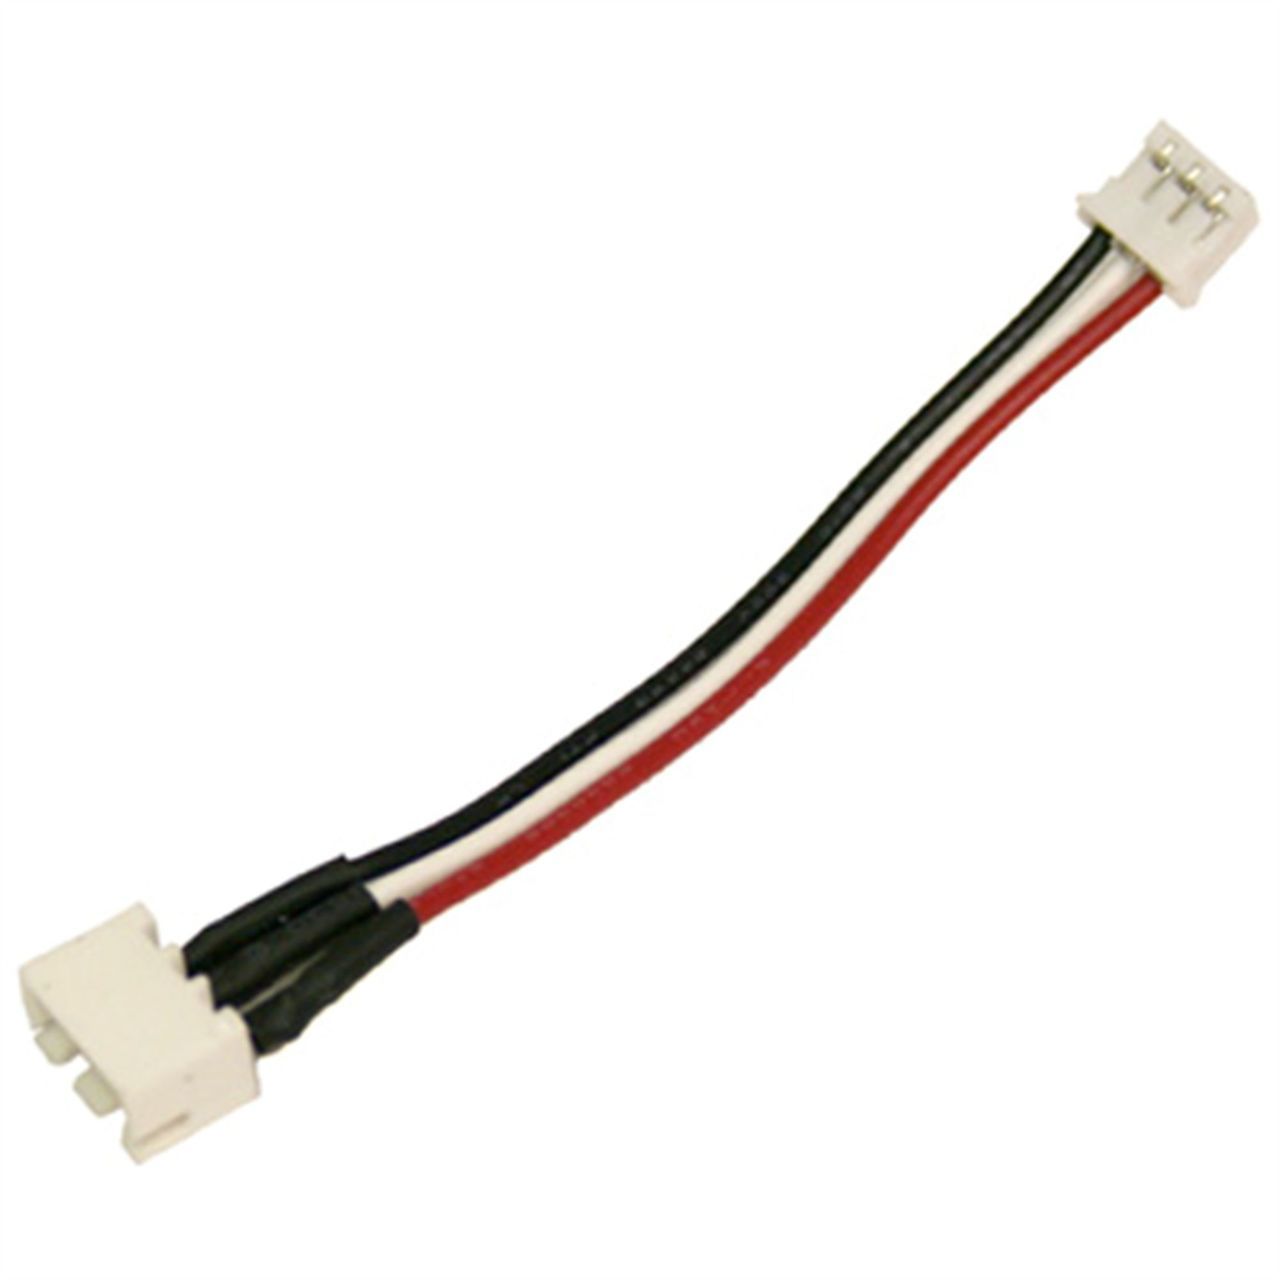 Blade Charge Adapter JST-PH to JST-XH 200QX BLH7713